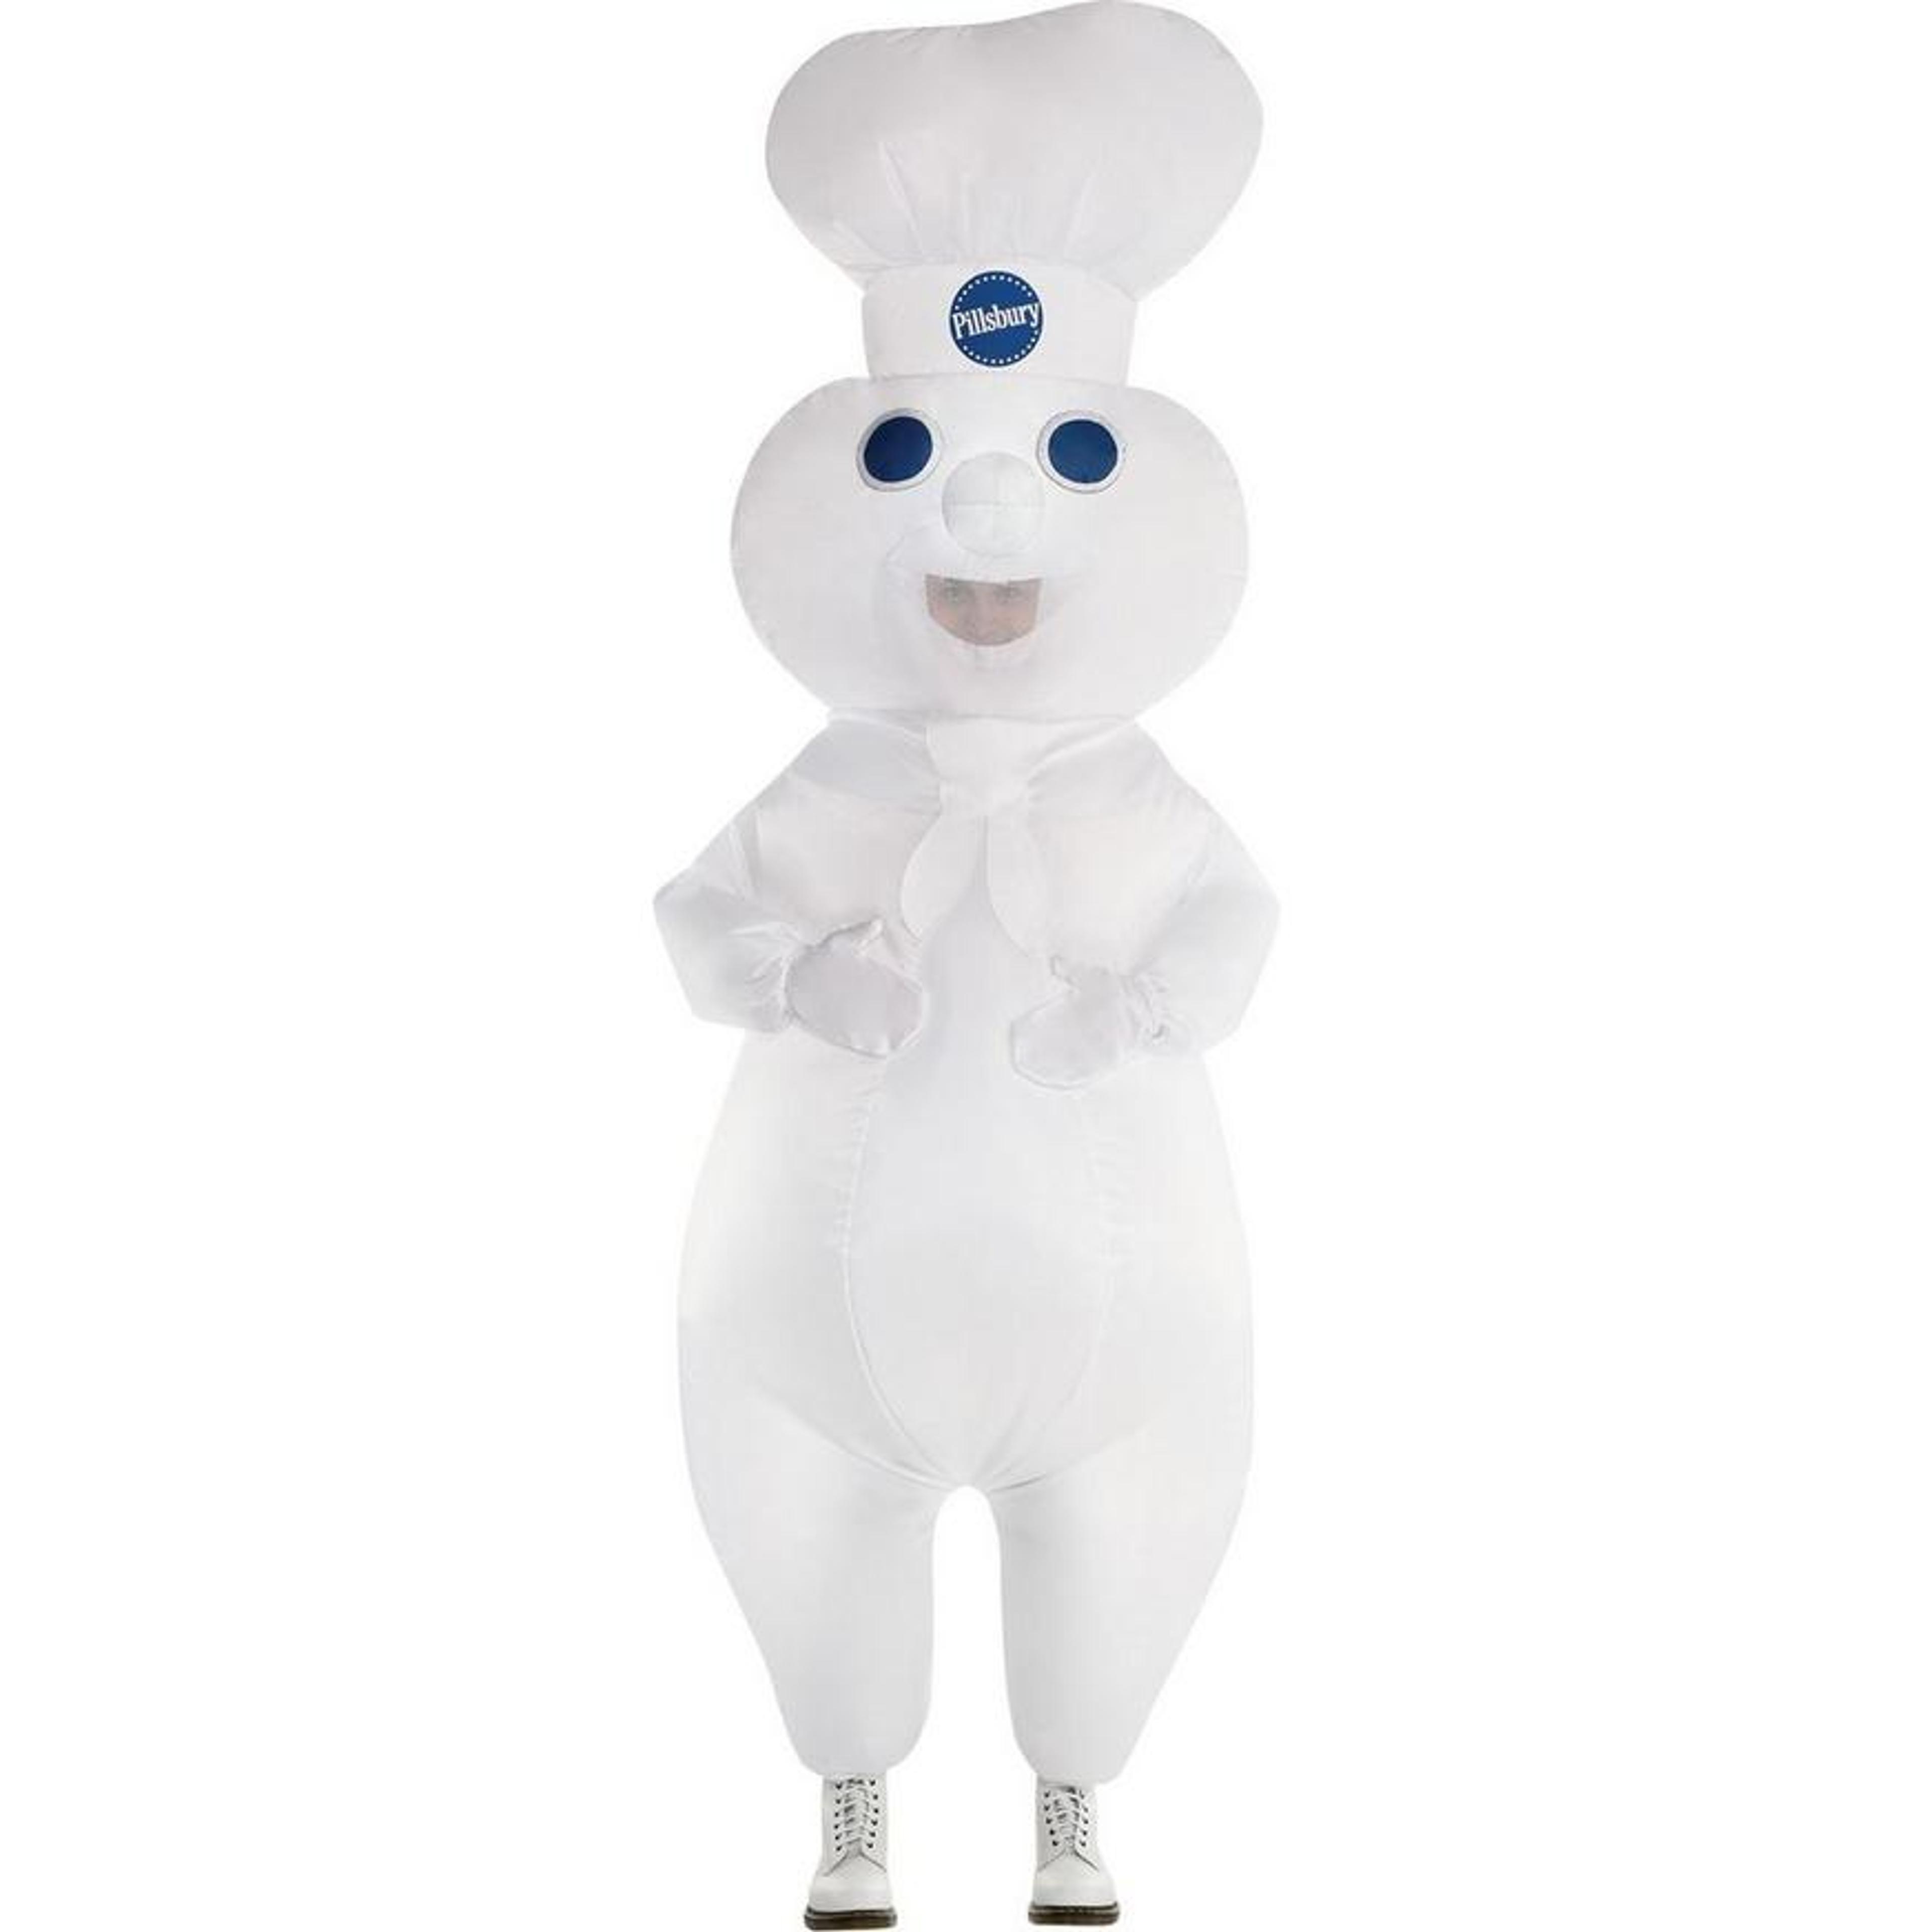 Adult Inflatable Pillsbury Doughboy Costume | Party City